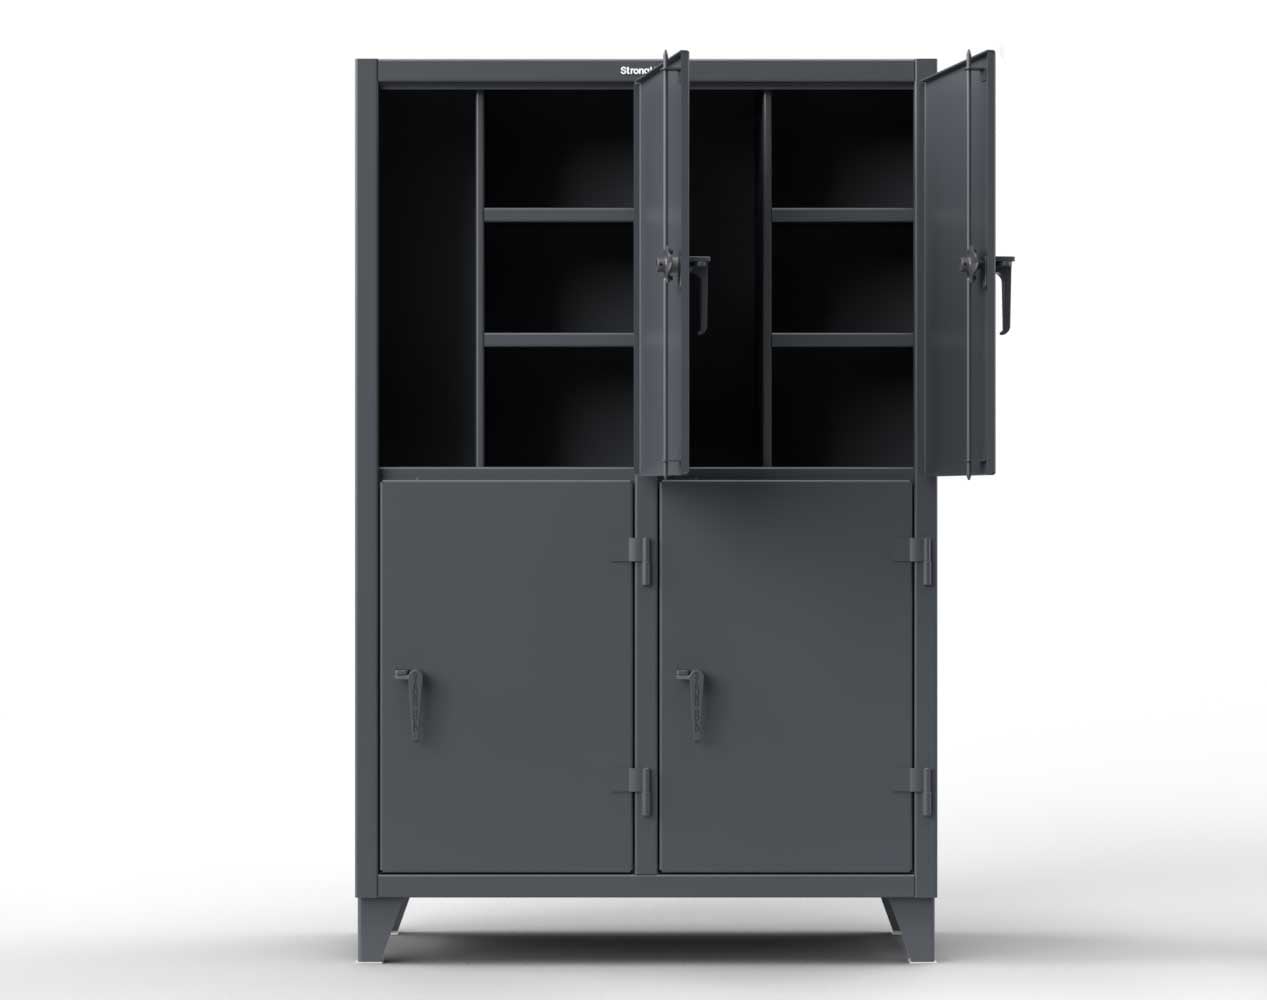 Extreme Duty 12 GA Double-Tier Locker with 10 Compartments, 20 Shelves, Coat Hooks - 122 in. W x 24in. D x 78 in. H